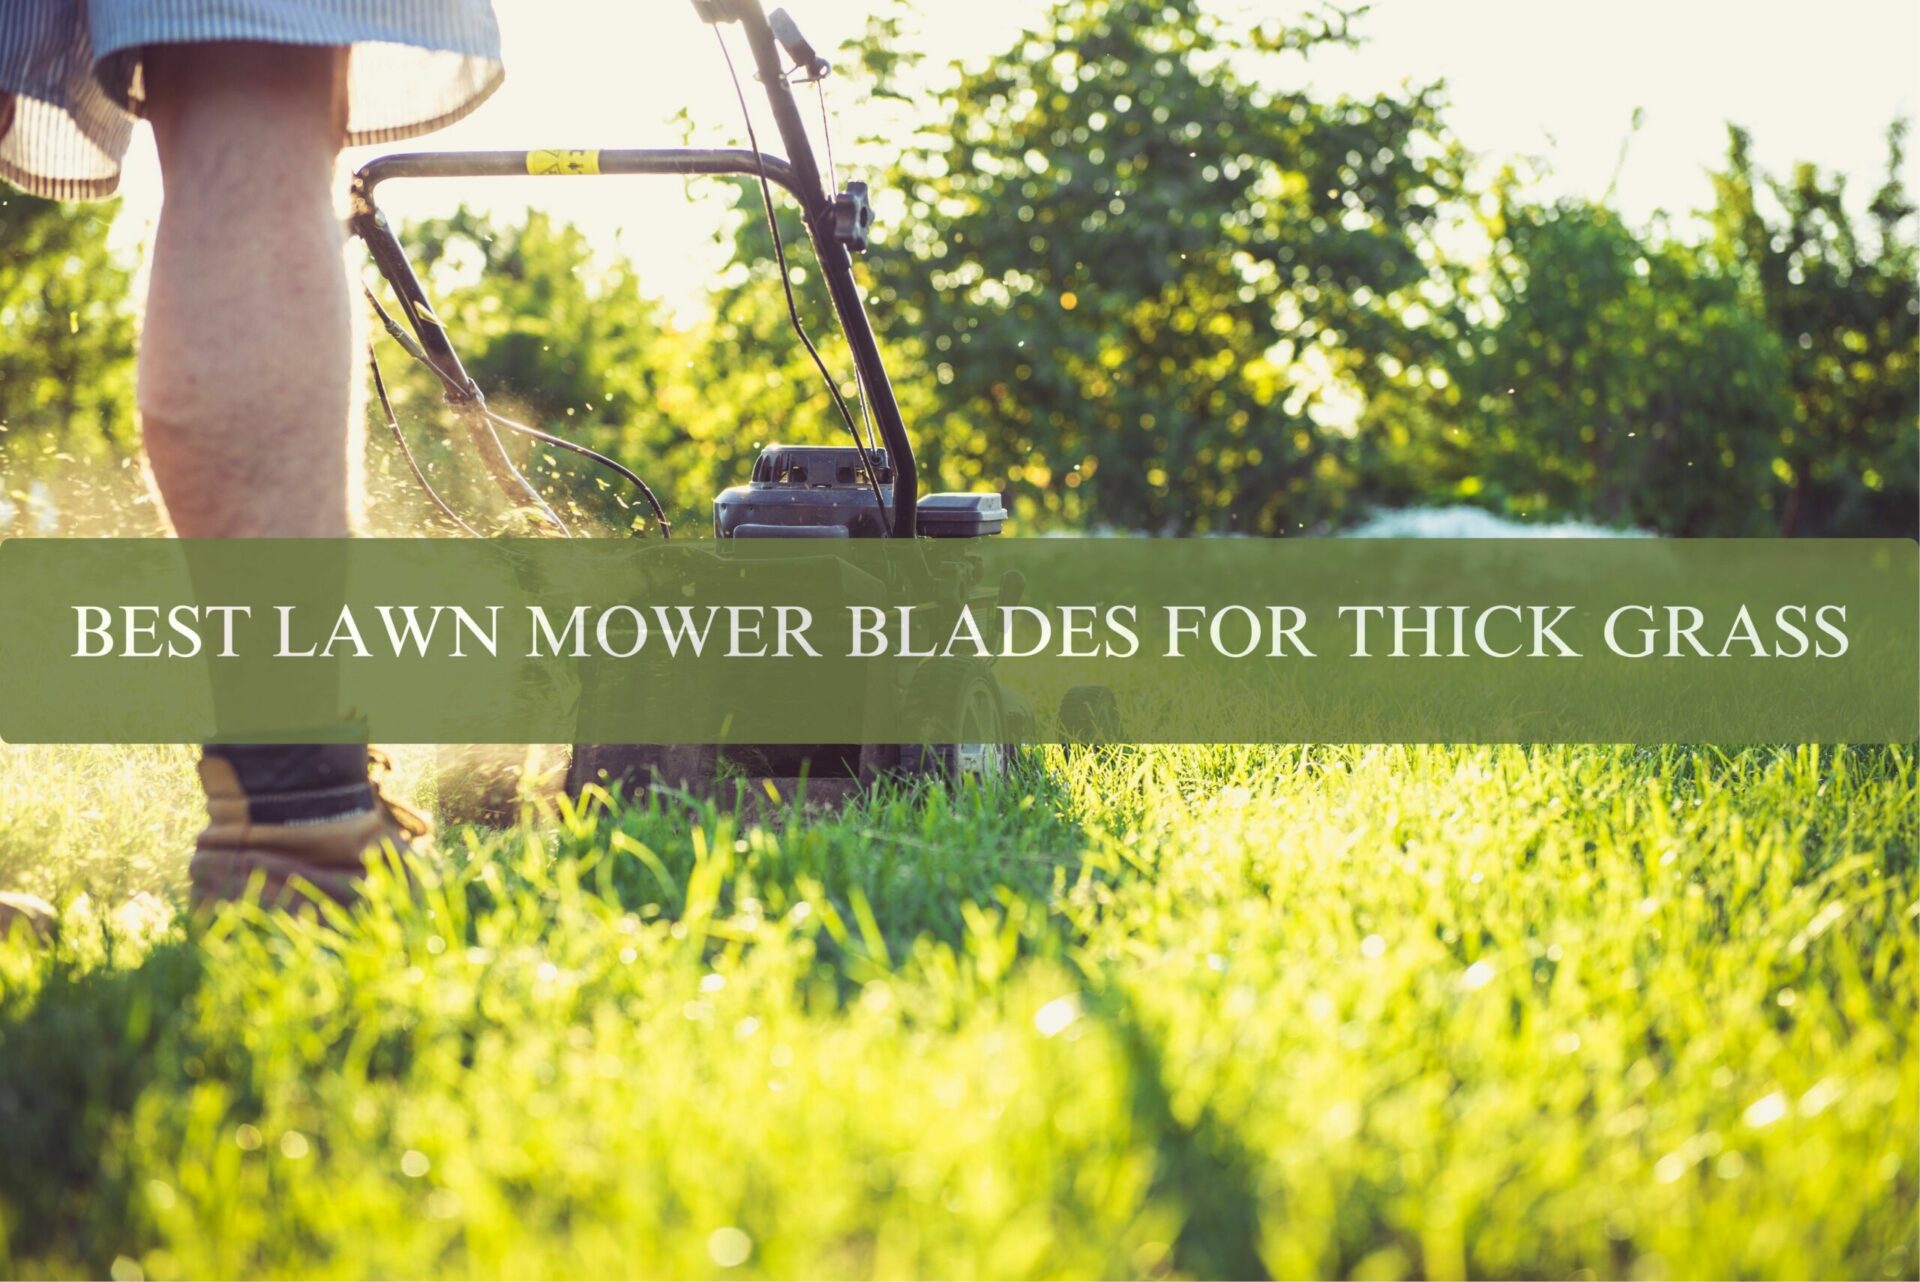 BEST LAWN MOWER BLADES FOR THICK GRASS